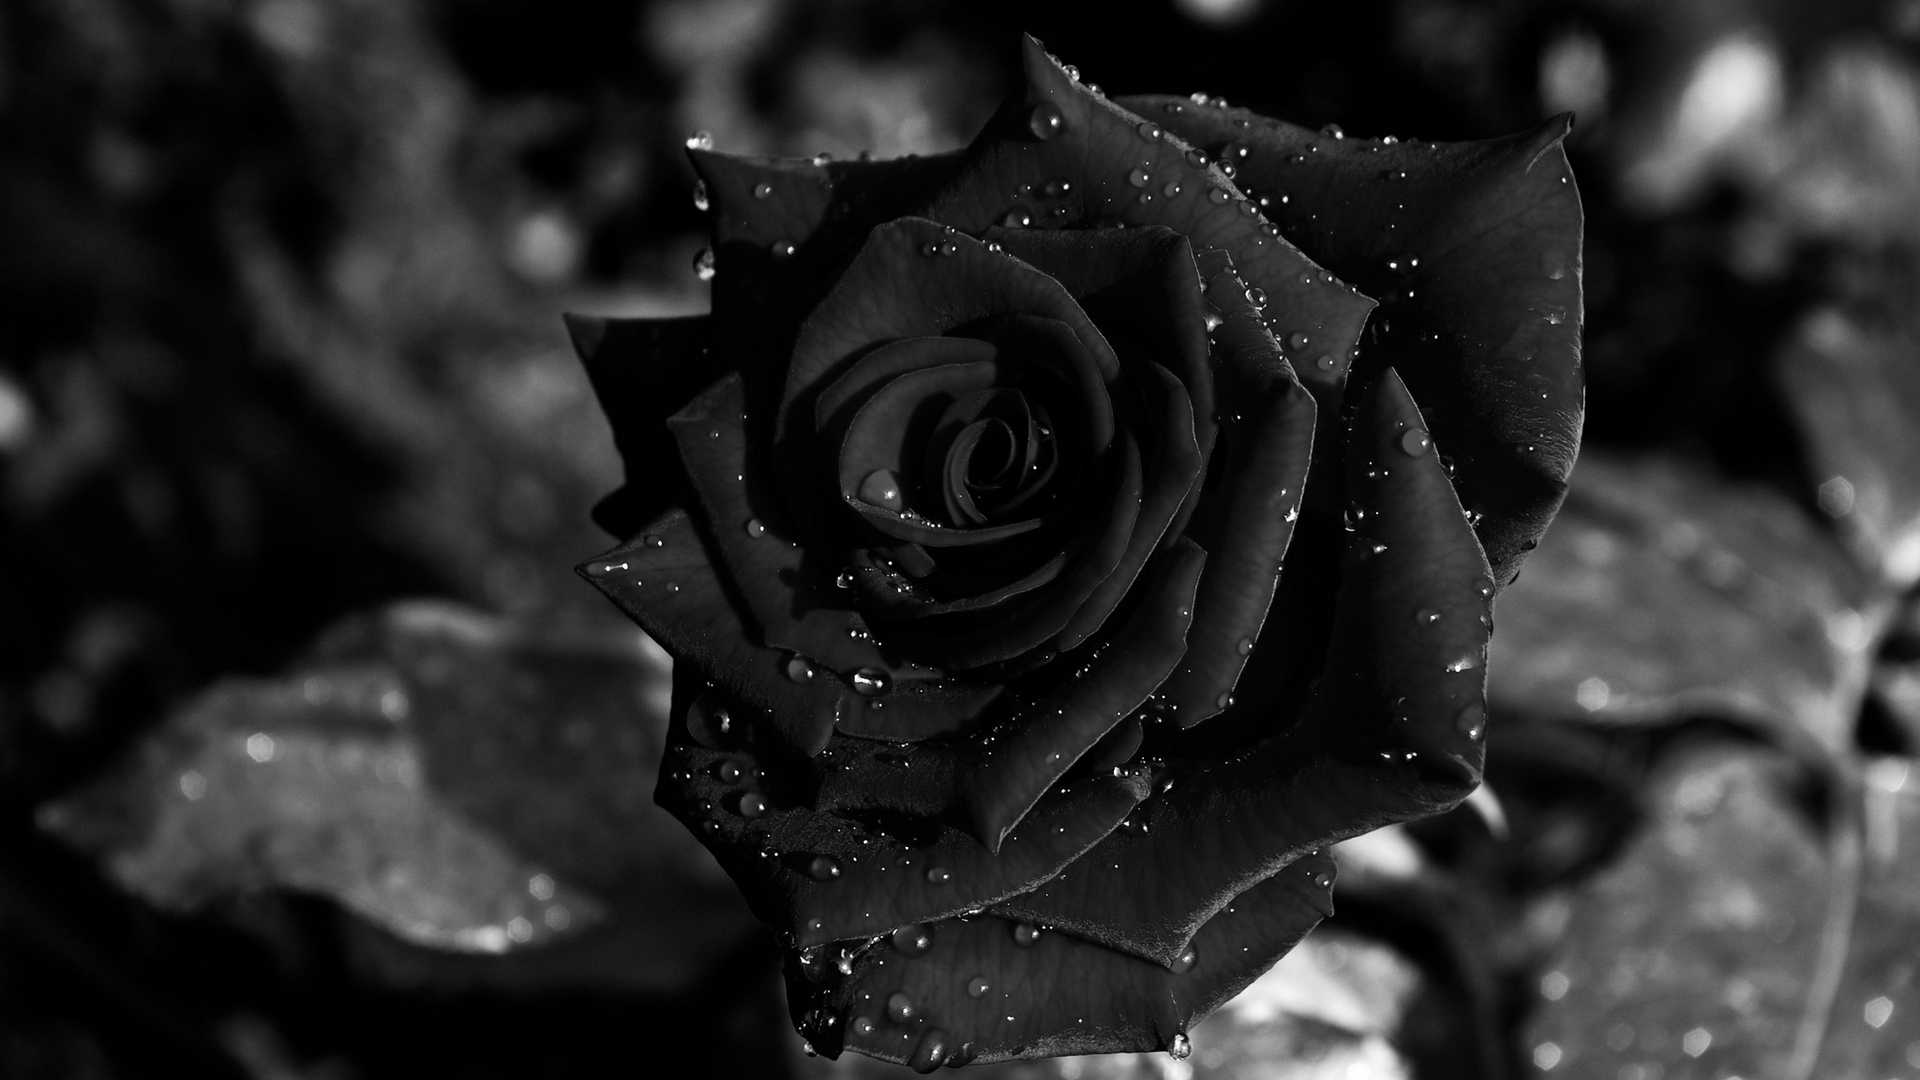 Black Roses Background Trends With Rose Wallpaper Image Photo